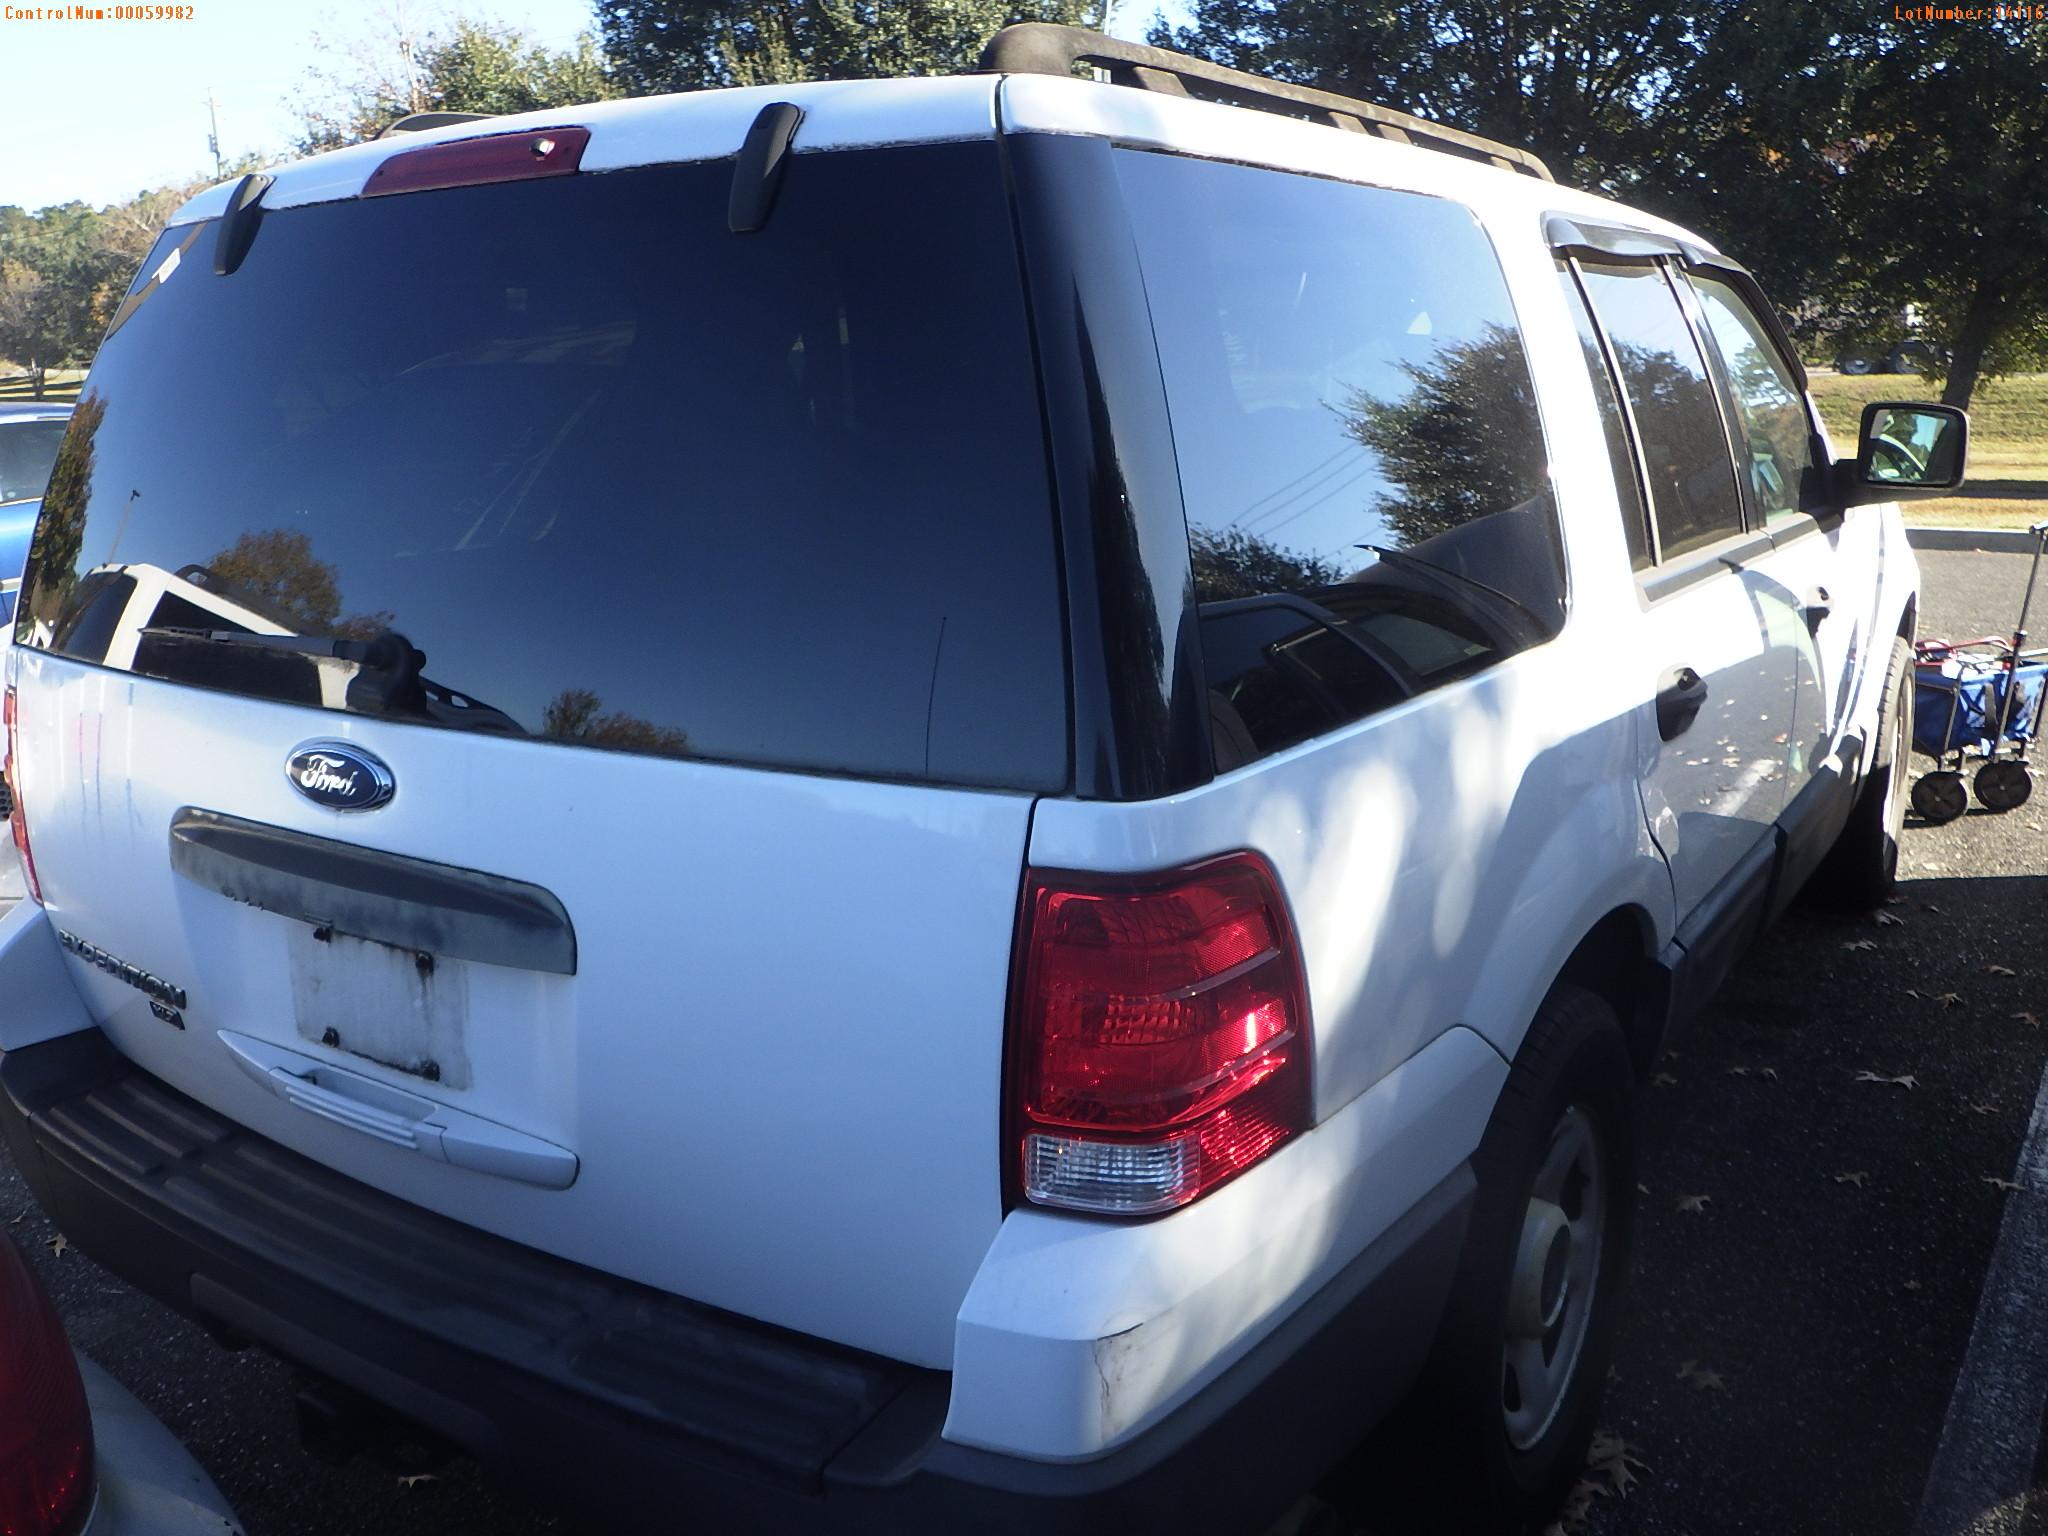 12-14116 (Cars-SUV 4D)  Seller: Florida State D.F.S. 2005 FORD EXPEDITIO